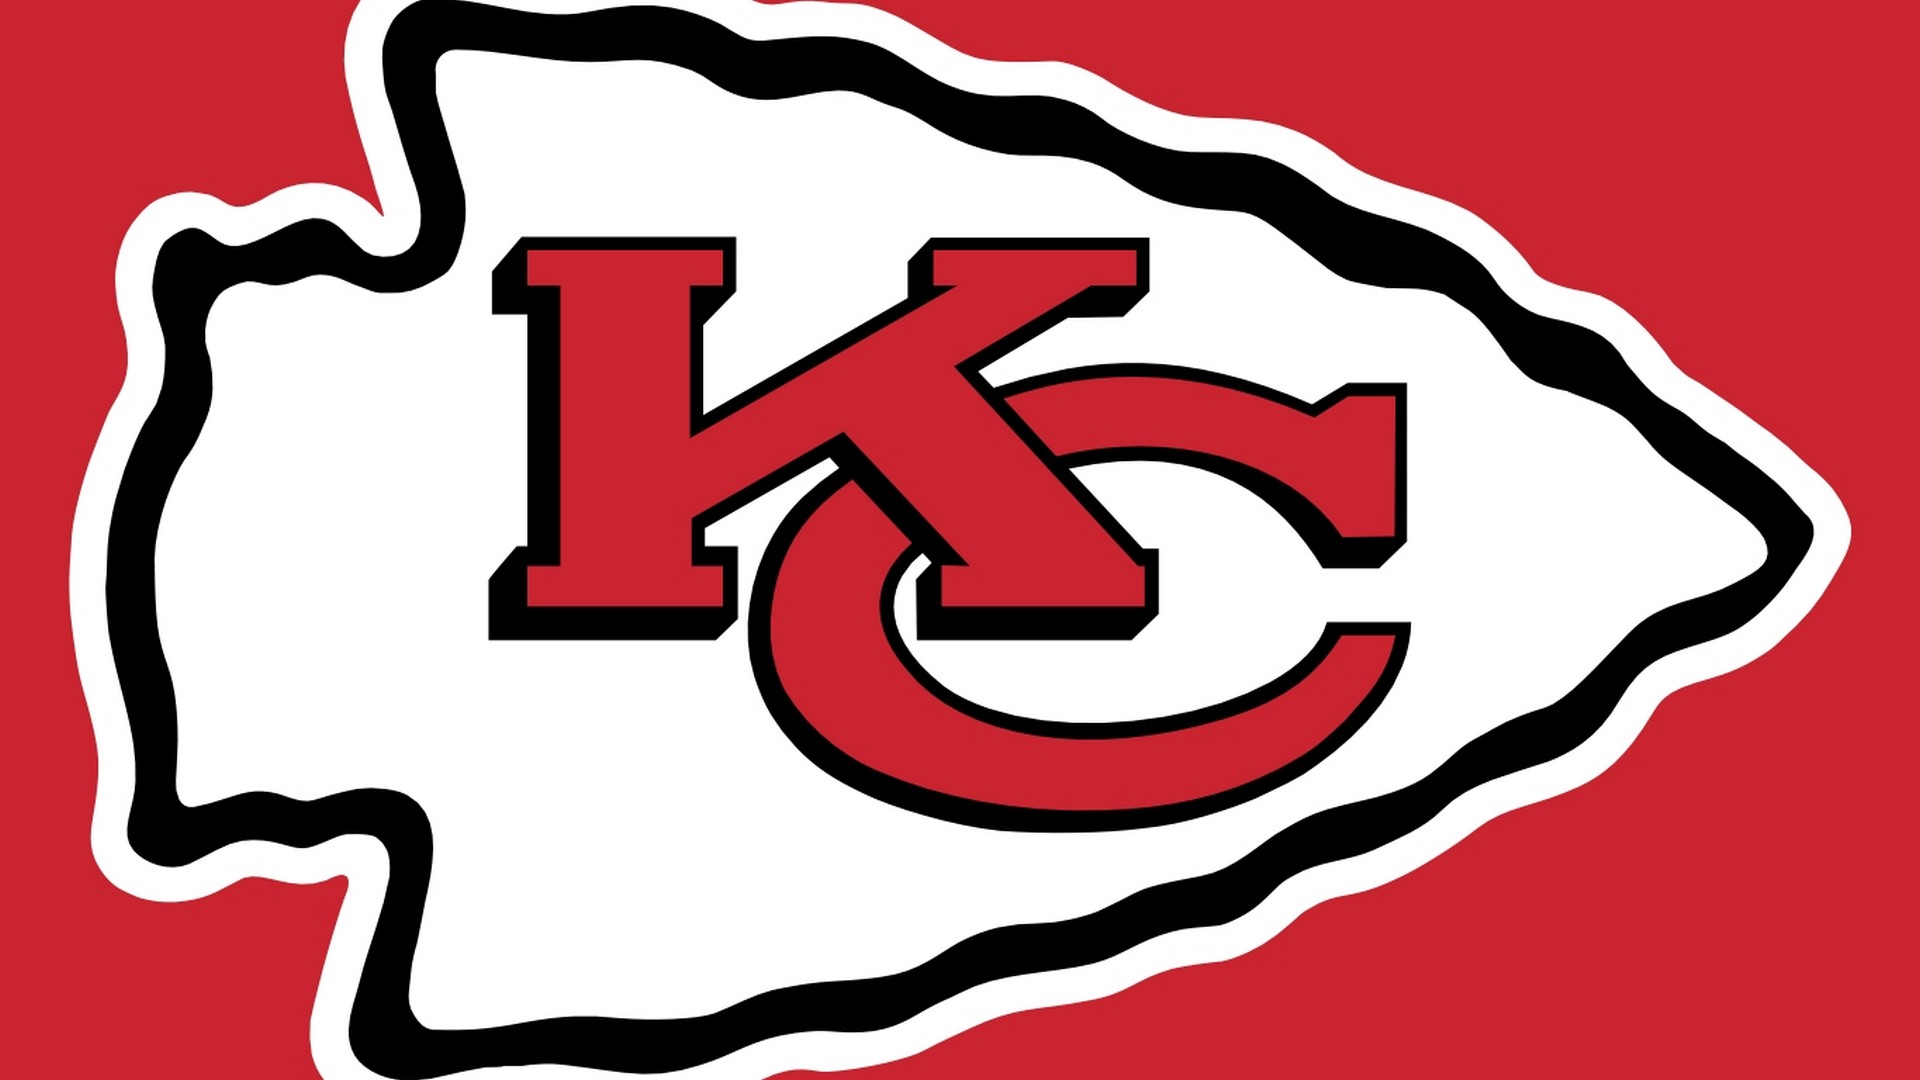 Kansas City Chiefs Mac Backgrounds With Resolution 1920X1080 pixel. You can make this wallpaper for your Mac or Windows Desktop Background, iPhone, Android or Tablet and another Smartphone device for free